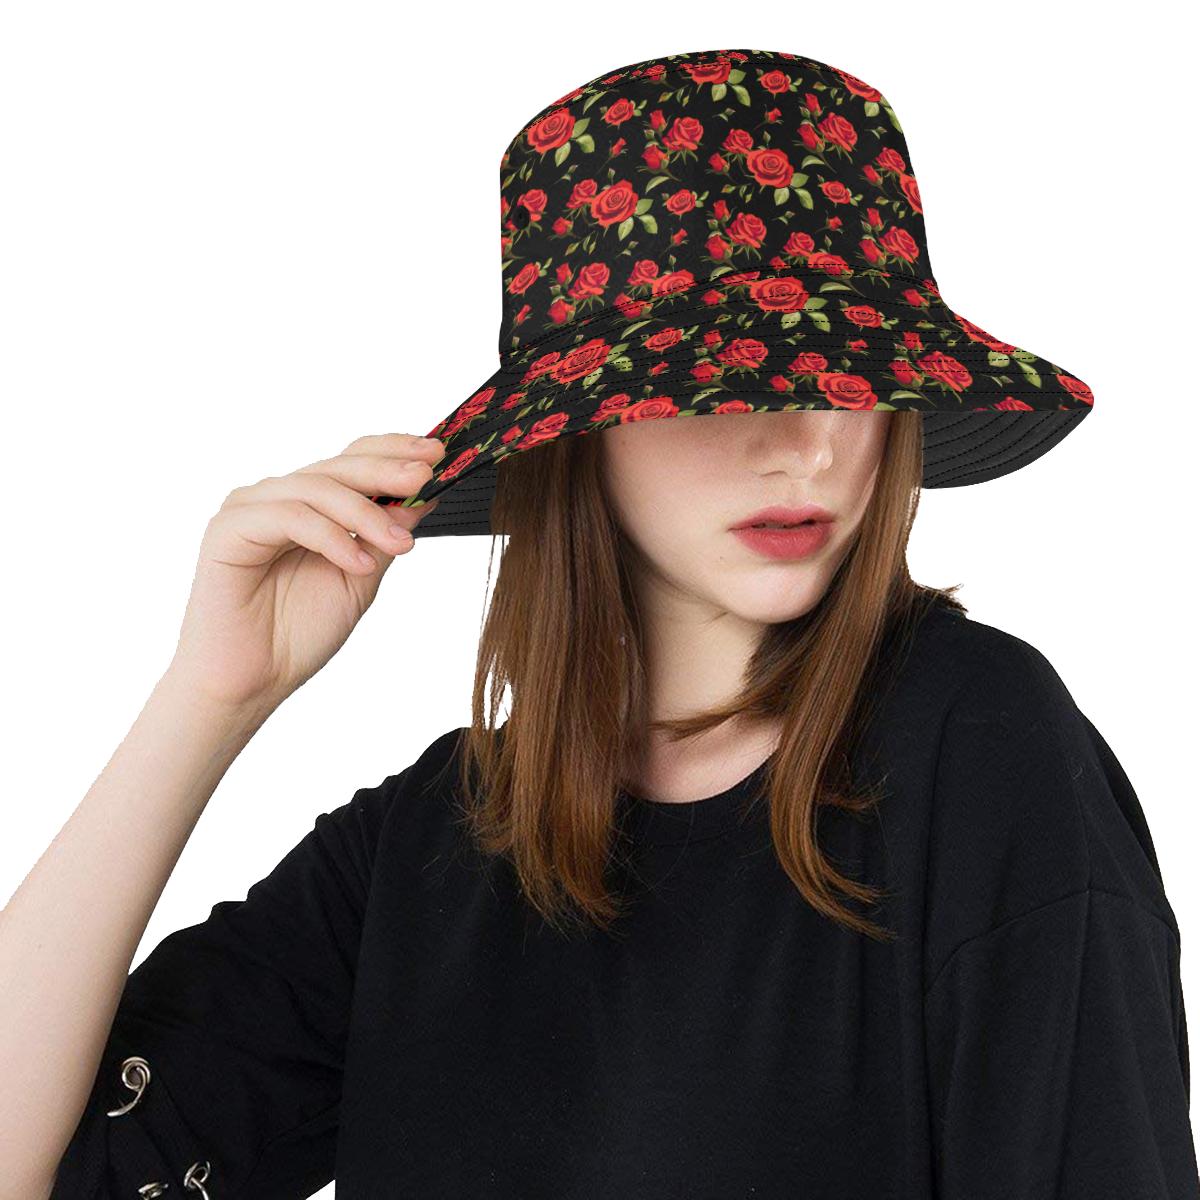 Red Rose Themed Print Unisex Bucket Hat